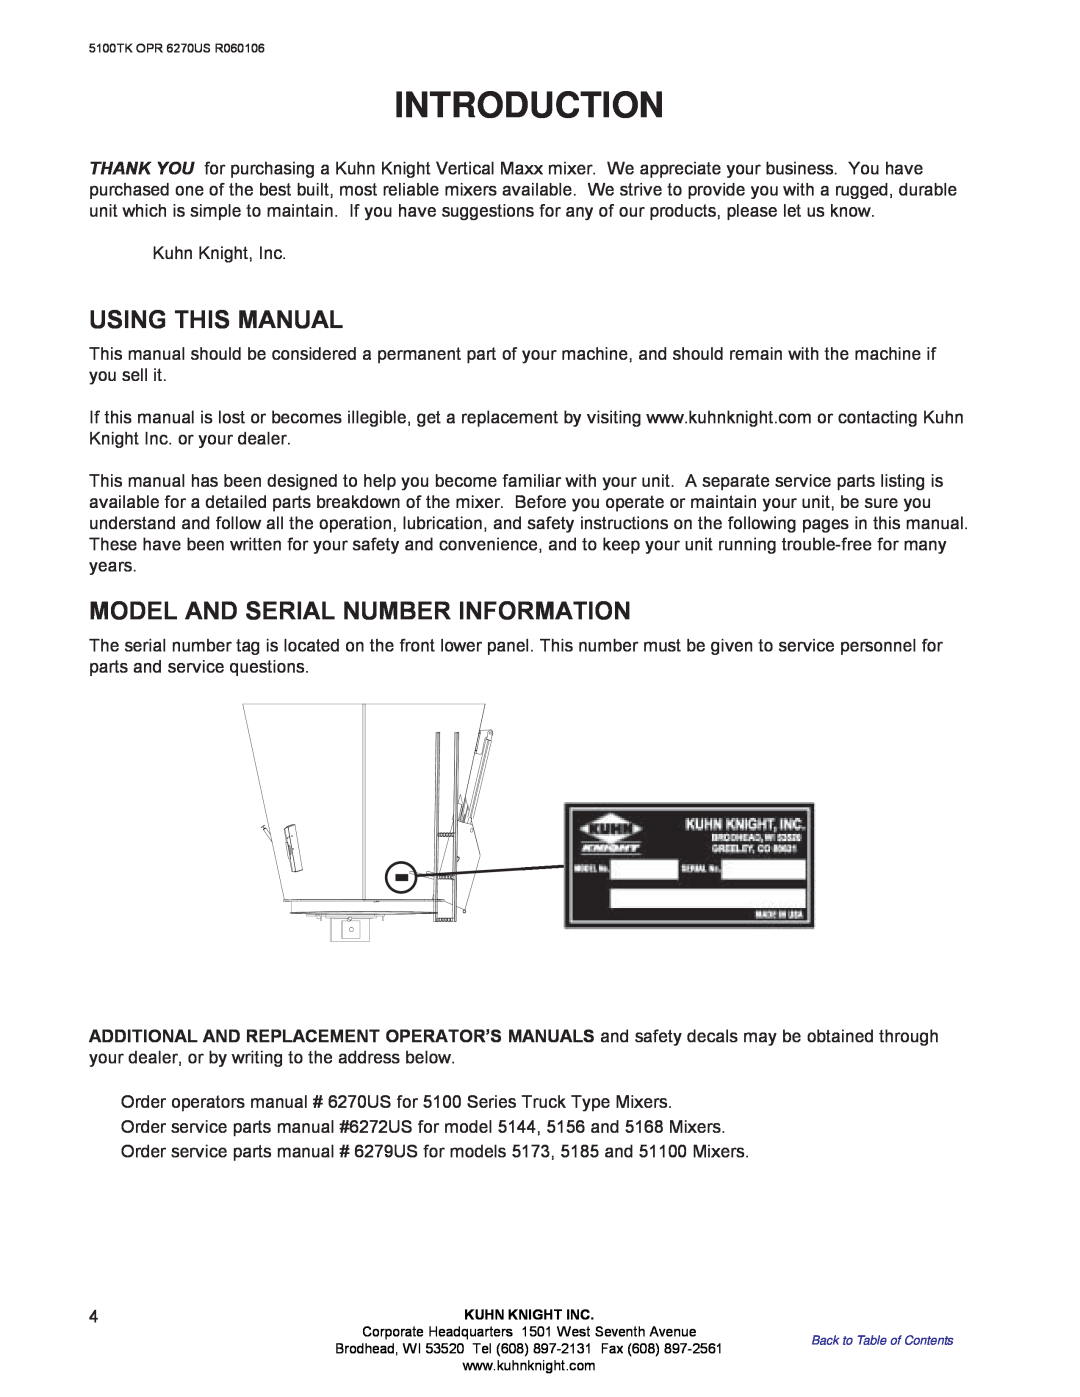 Kuhn Rikon 5100 instruction manual Introduction, Using This Manual, Model And Serial Number Information 